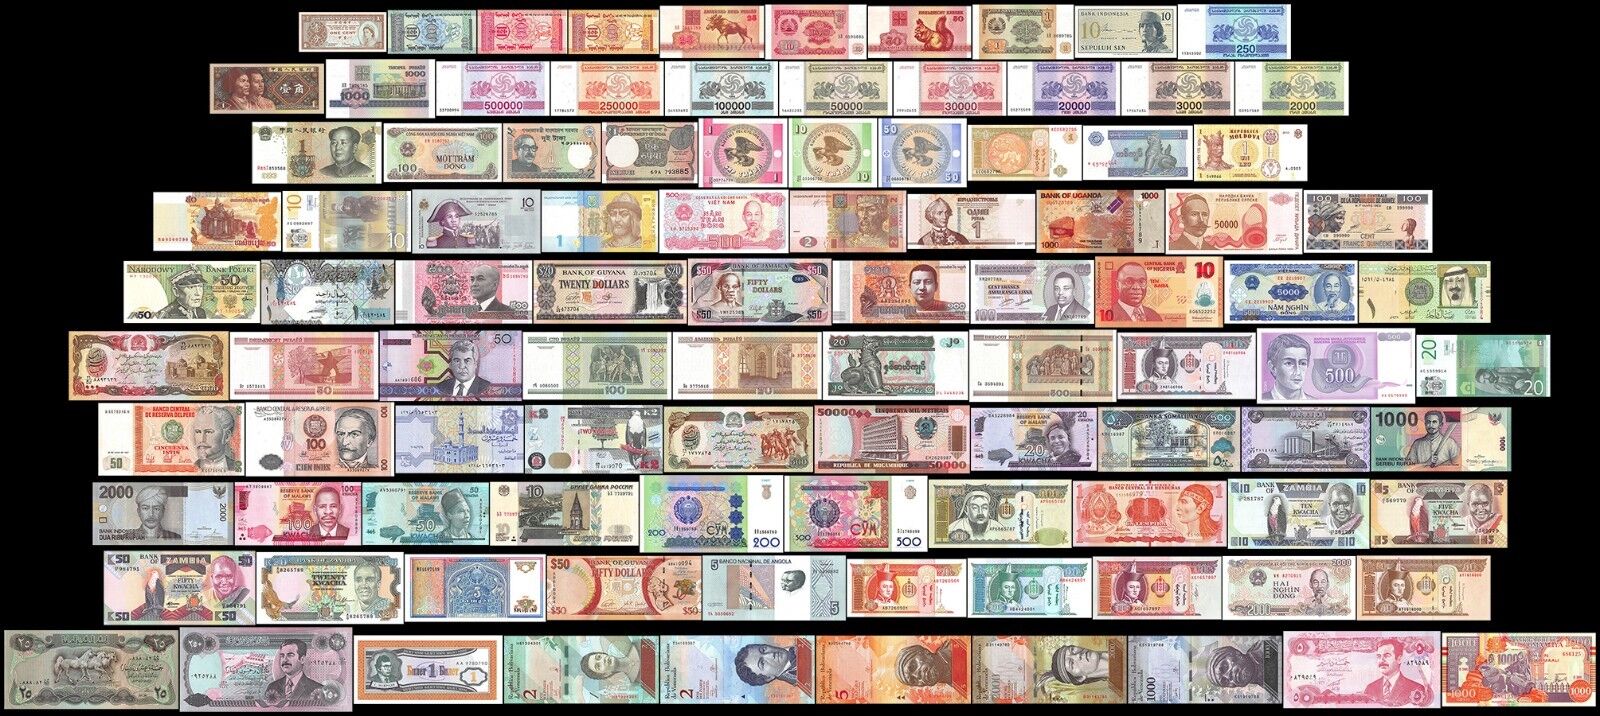 100 Pieces - PCS, of Different World MIX Foreign Banknotes,Currency,Uncirculated Без бренда